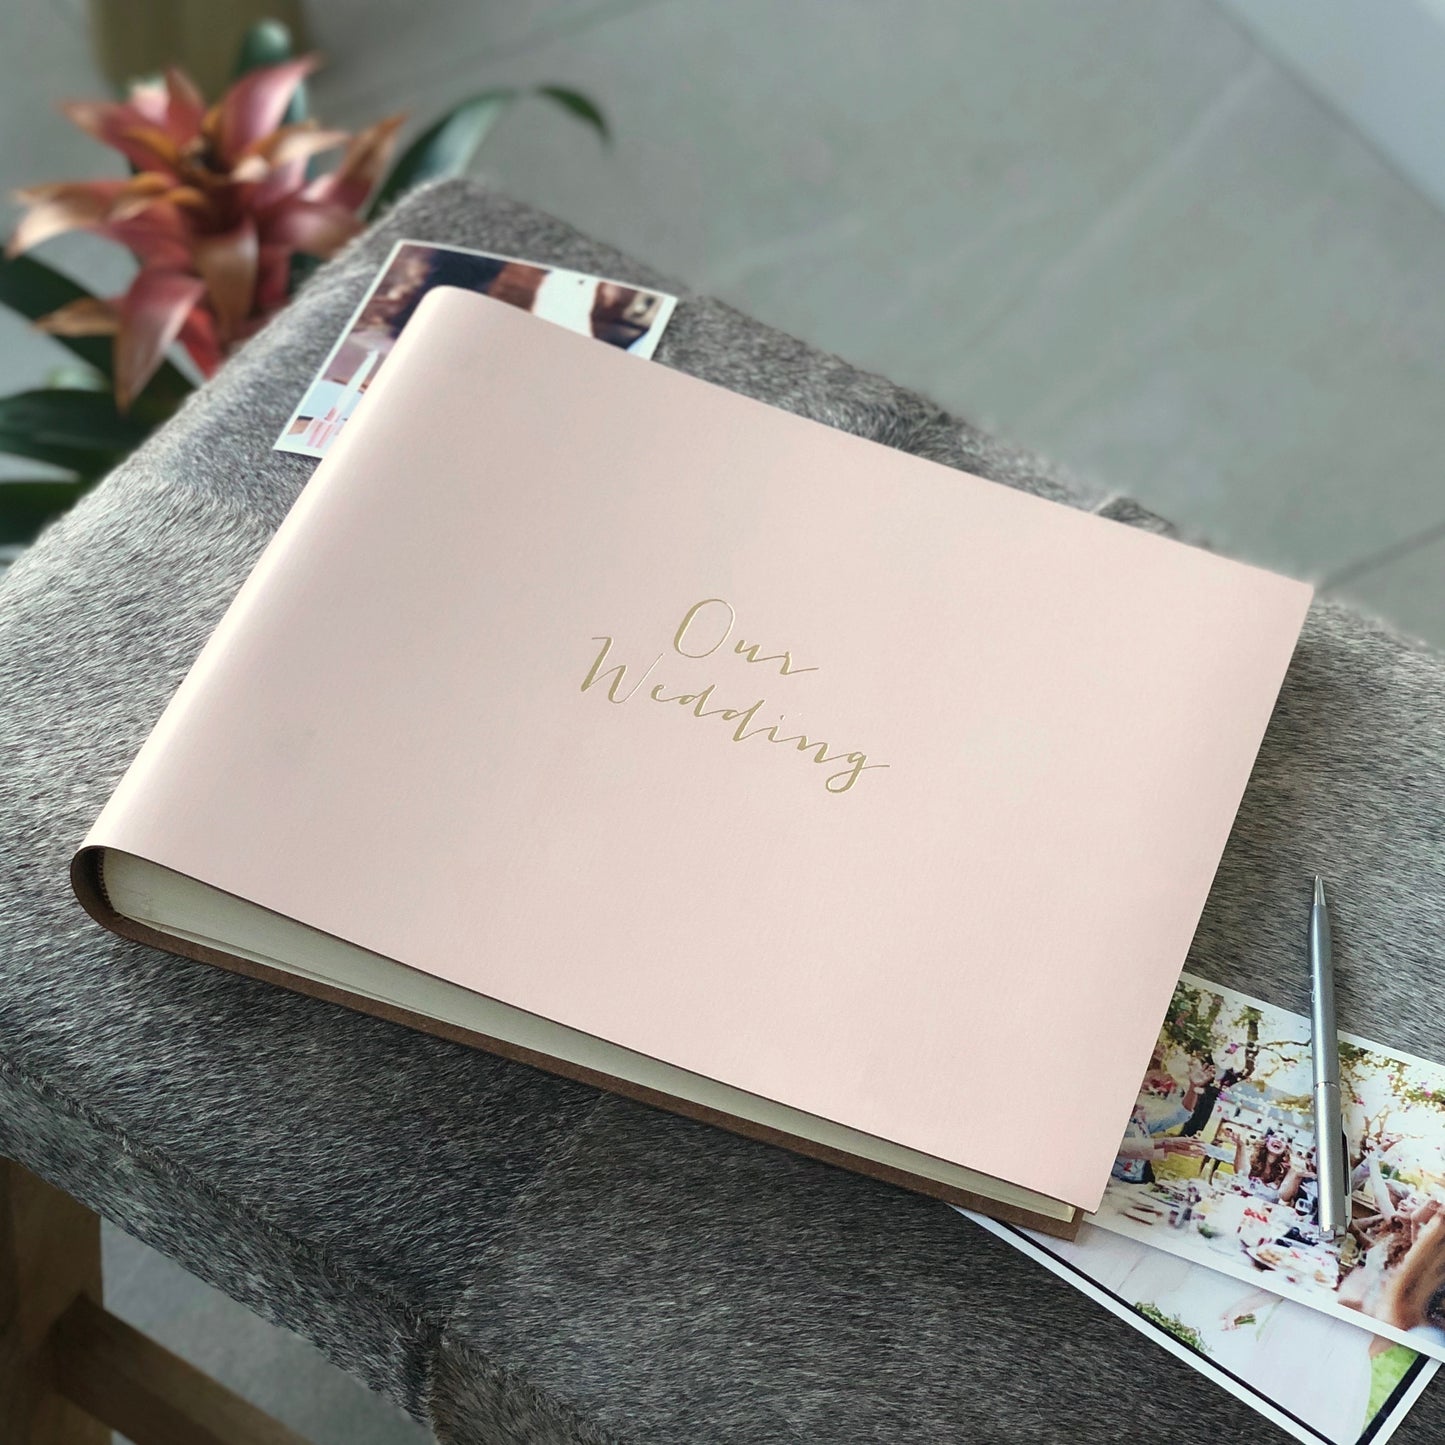 on a grey footstool is a pale pink wedding guest book, It has been pritend with the words Our Weddingon the front . There are wedding photos and a pen also on the stool